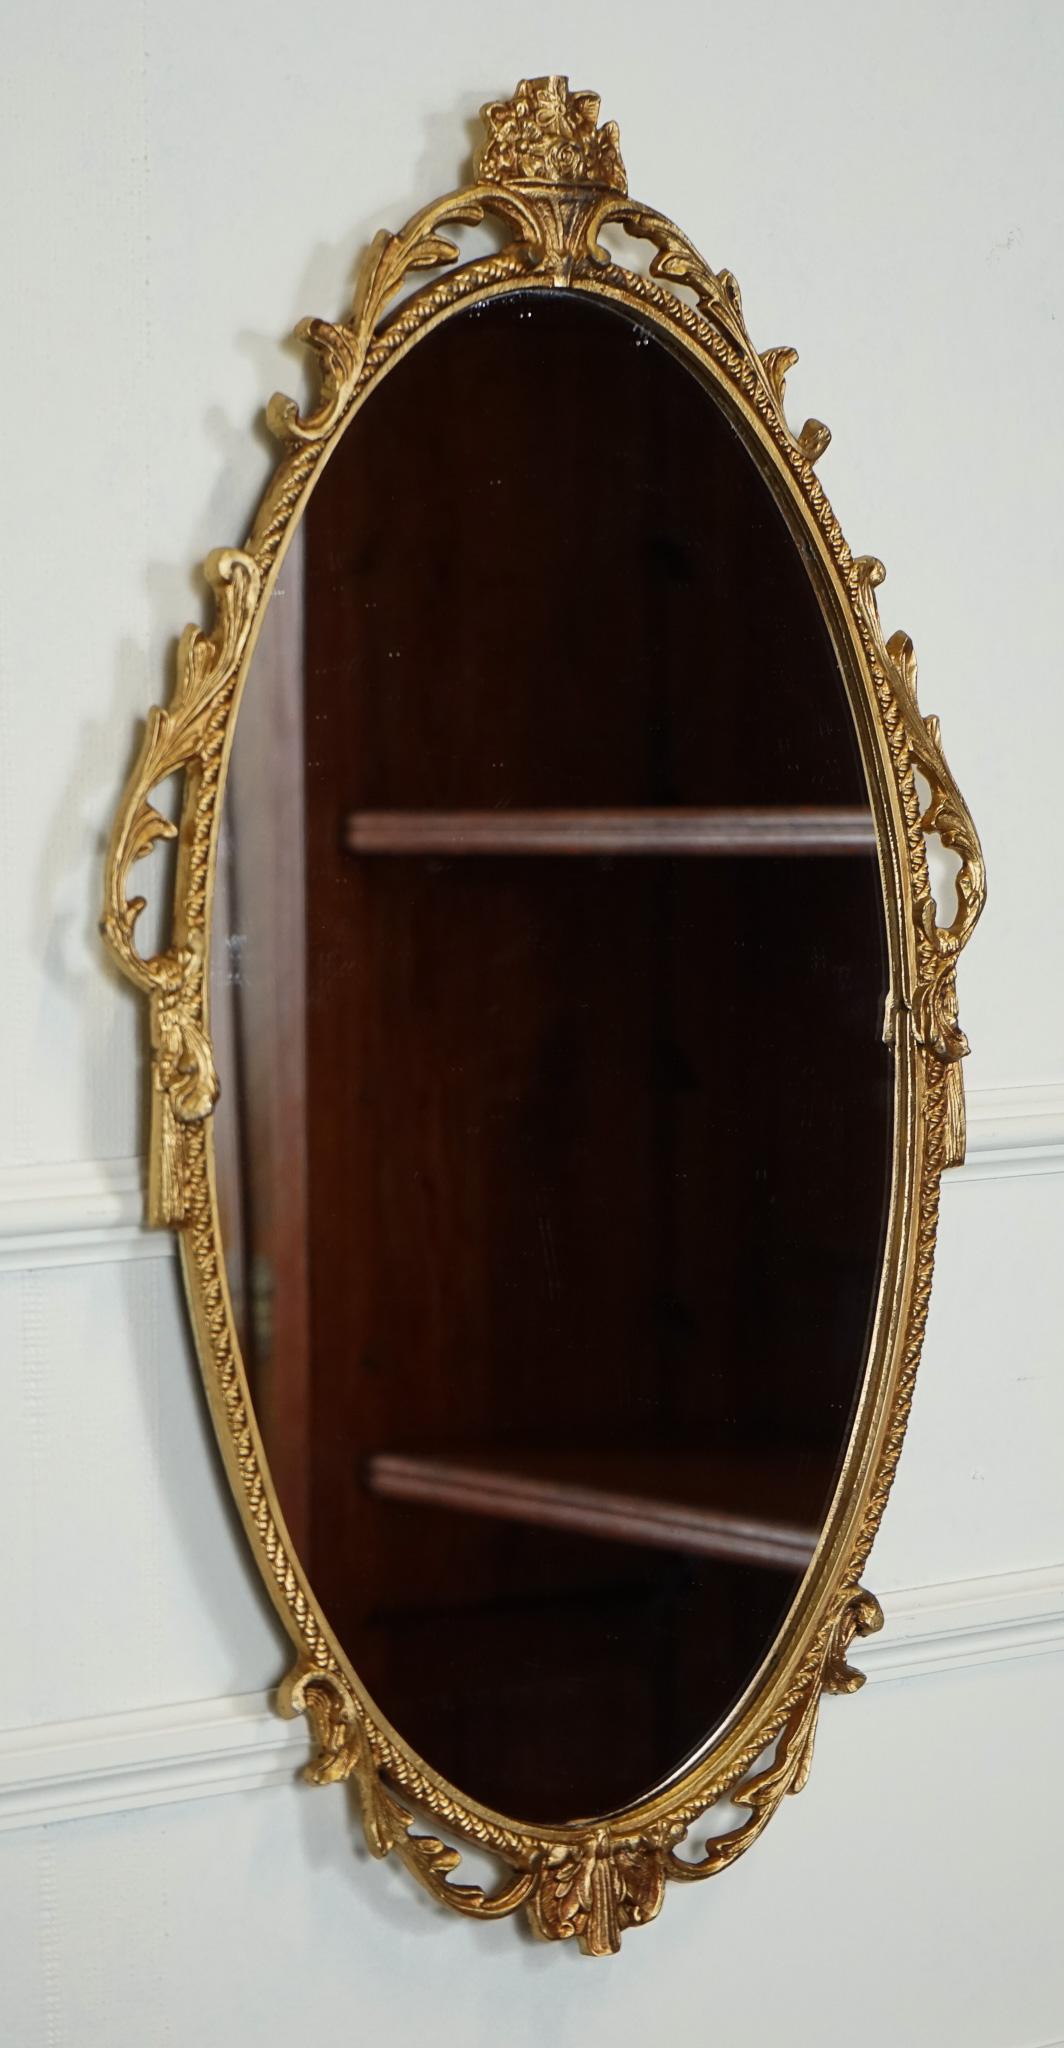 

We are delighted to offer for sale this Gold Ornate Oval Mirror.

Please carefully examine the pictures to see the condition before purchasing, as they form part of the description. If you have any questions, please message us.